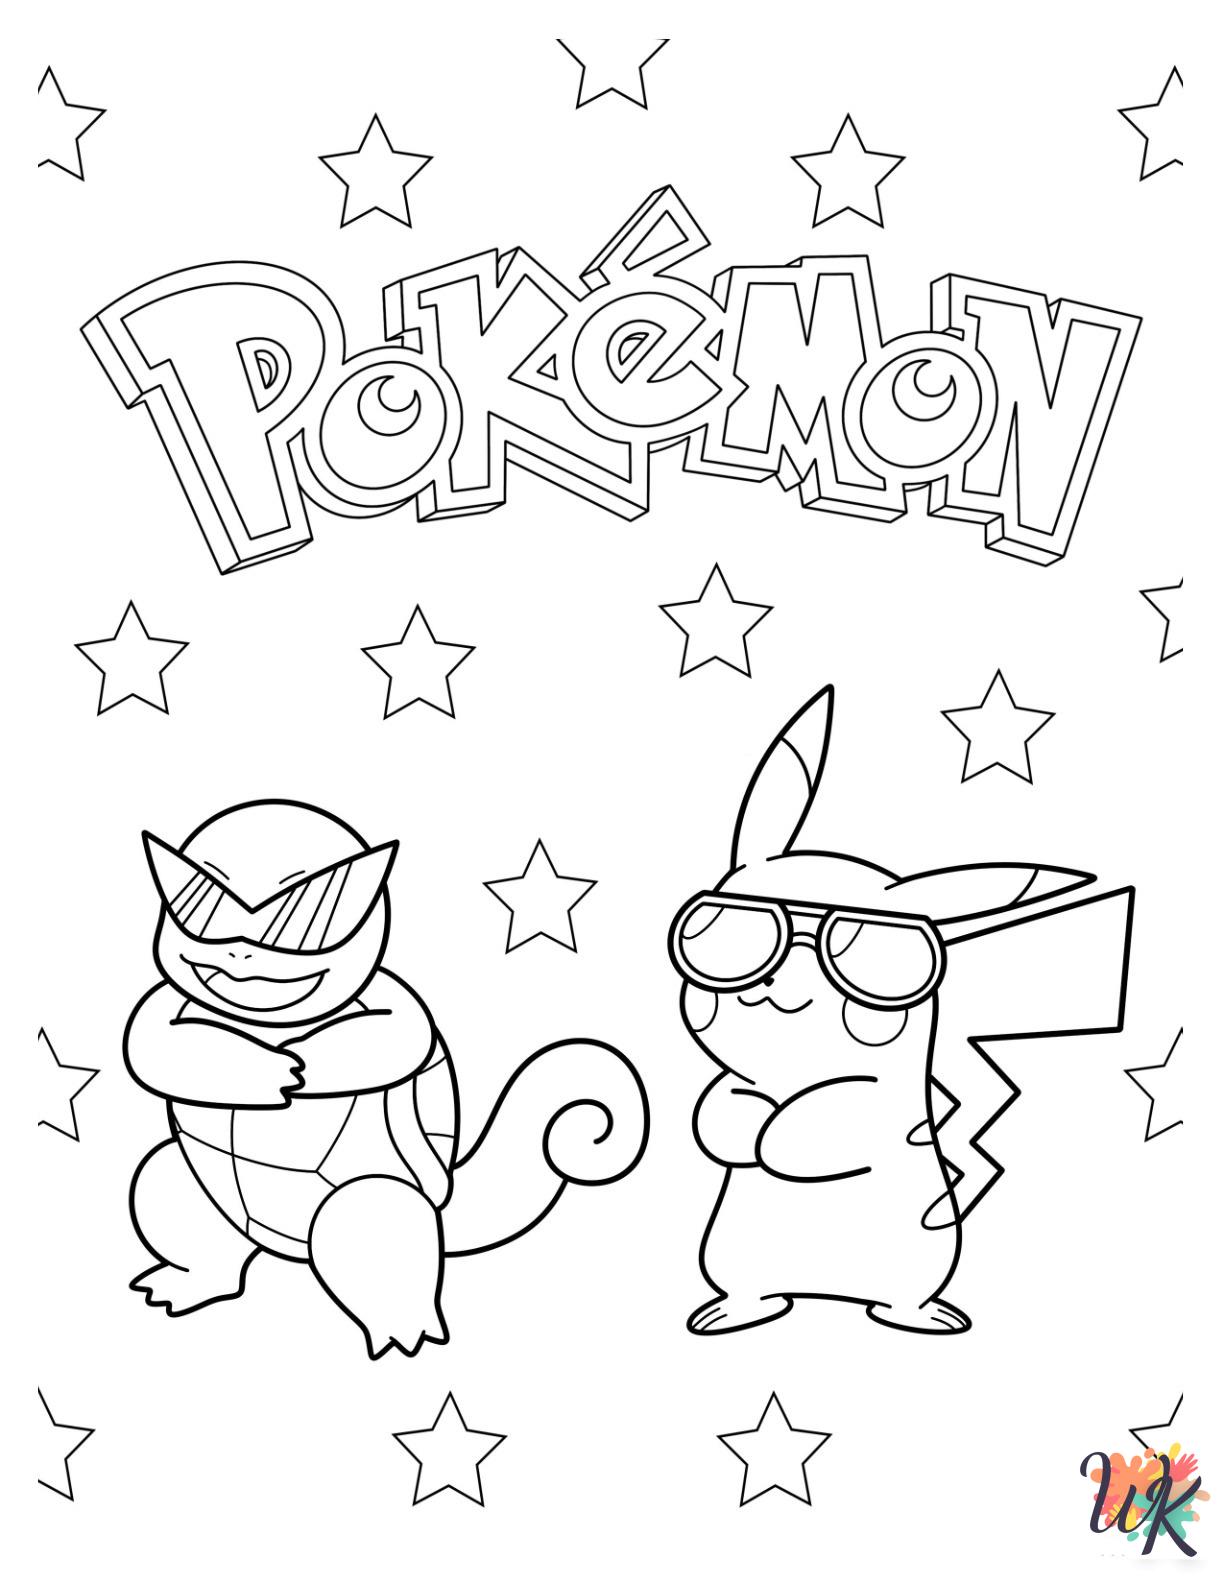 Squirtle coloring pages for adults pdf 1